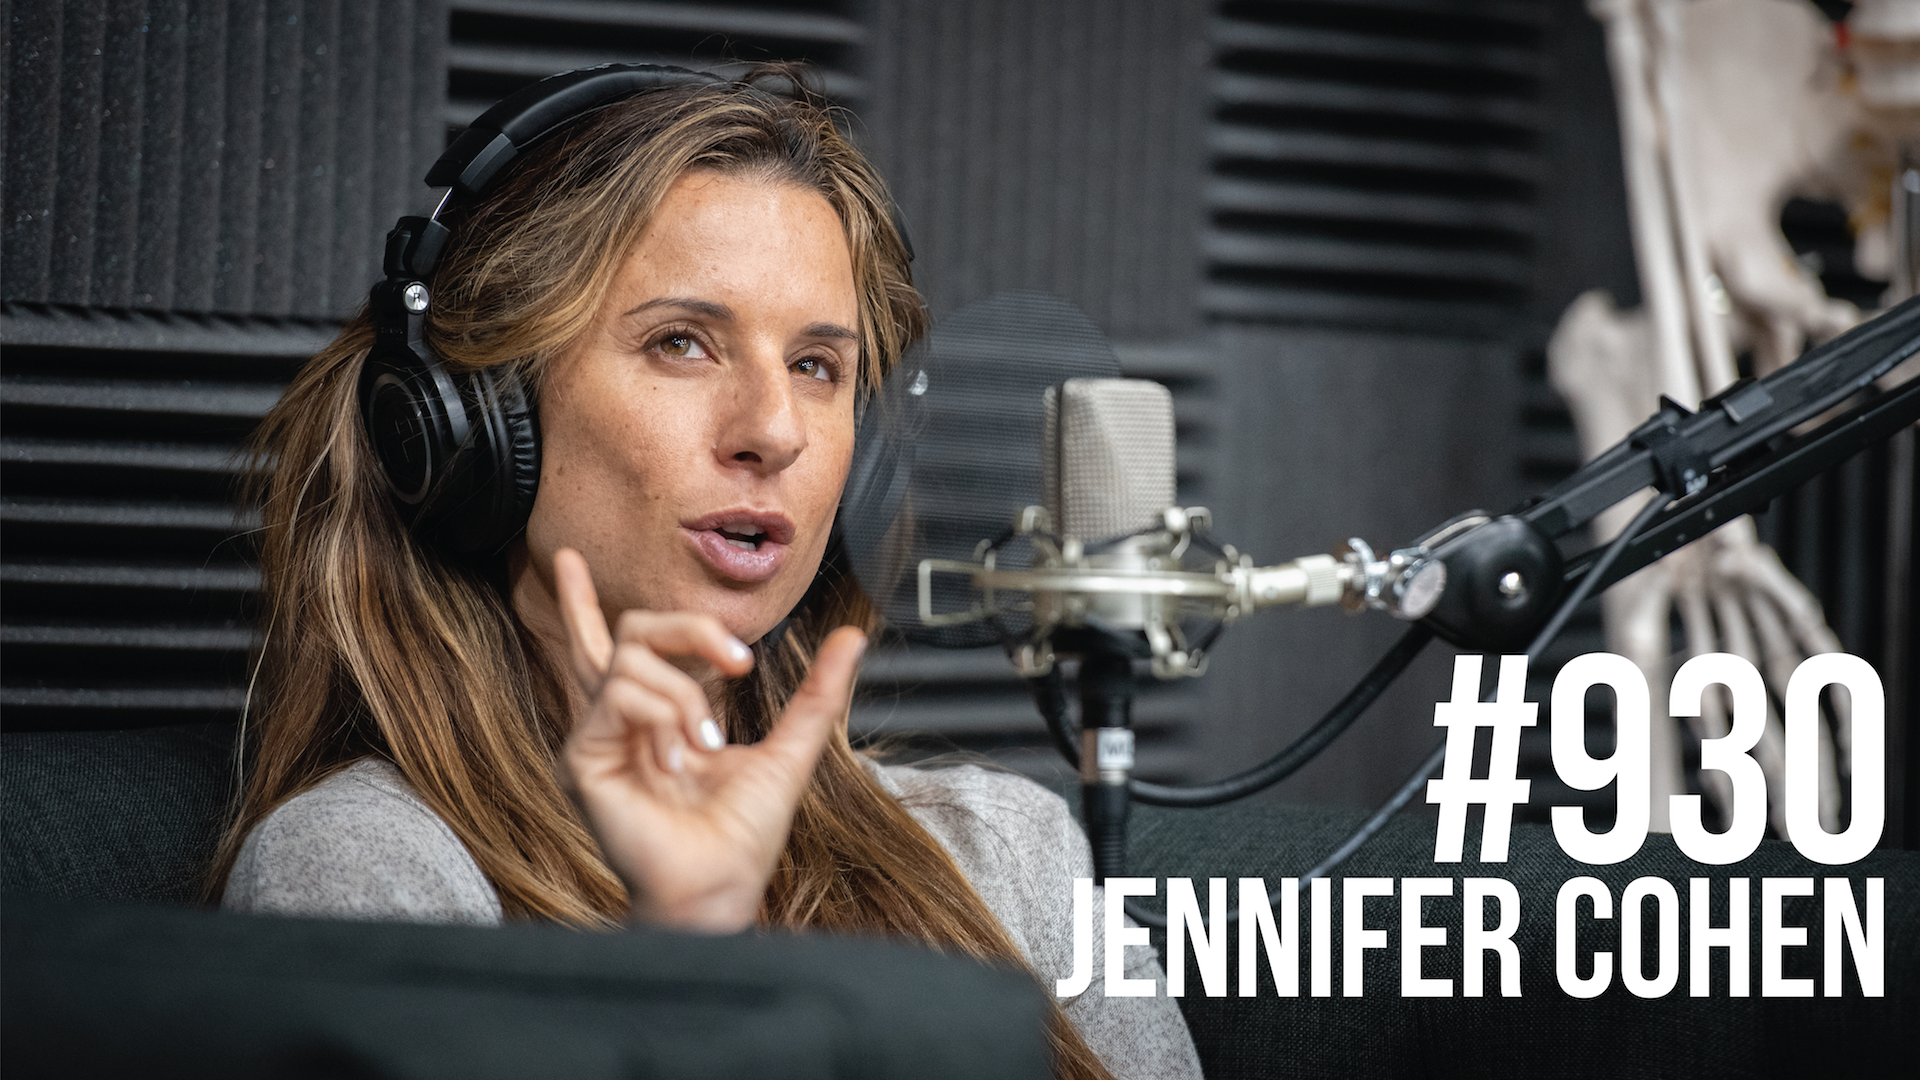 930: Jennifer Cohen Knows How to Get What She Wants